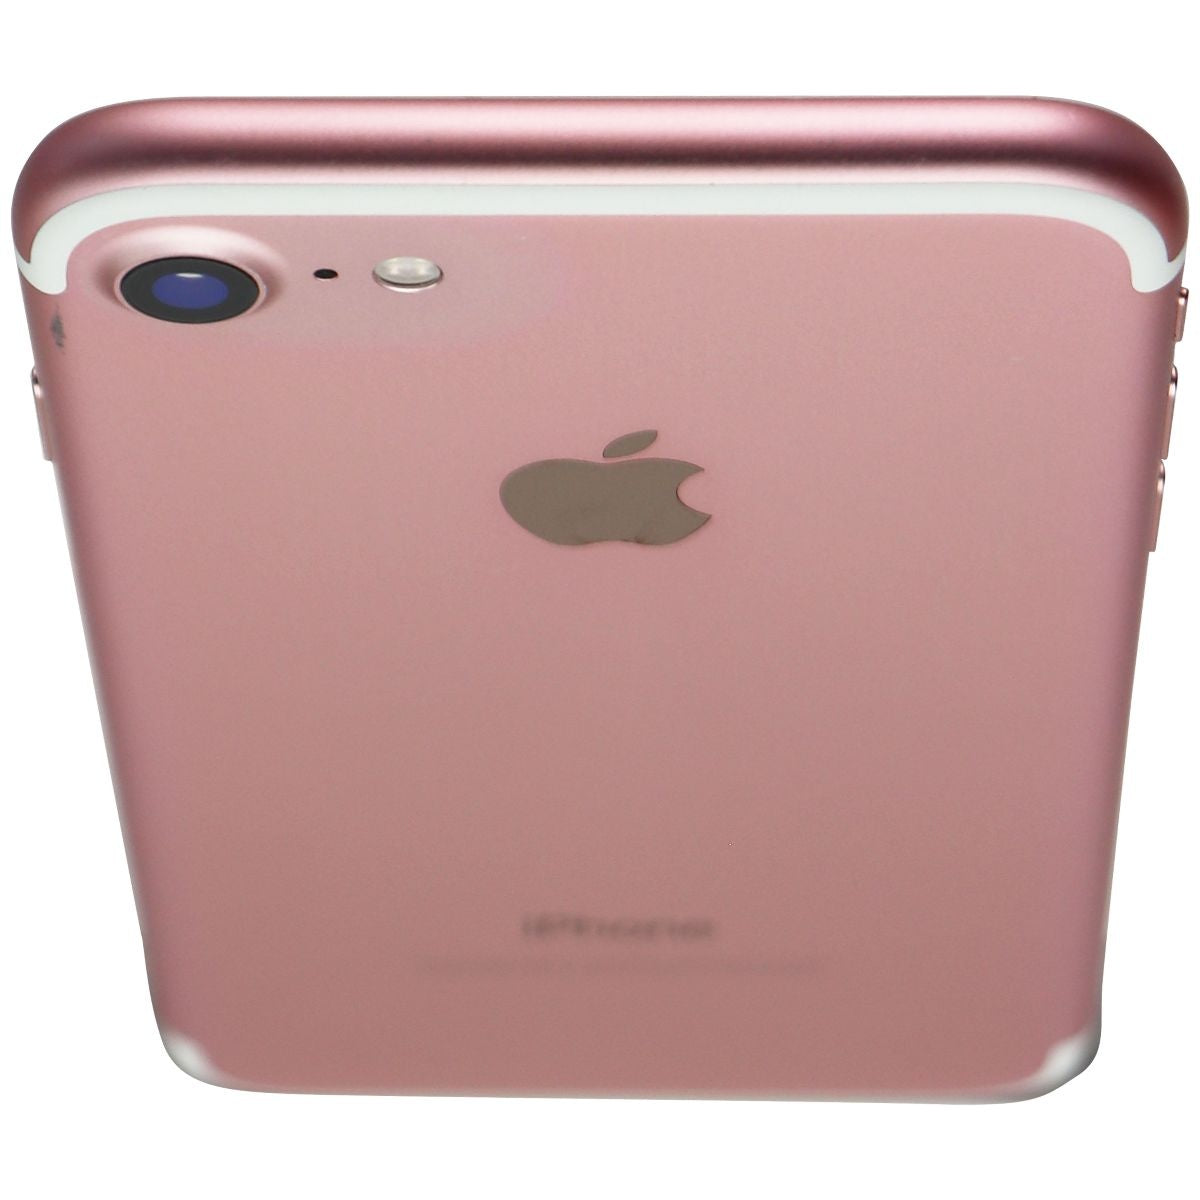 Apple iPhone 7 Smartphone A1660 (MN8P2LL/A) - Unlocked - 128GB / Rose Gold Cell Phones & Smartphones Apple    - Simple Cell Bulk Wholesale Pricing - USA Seller